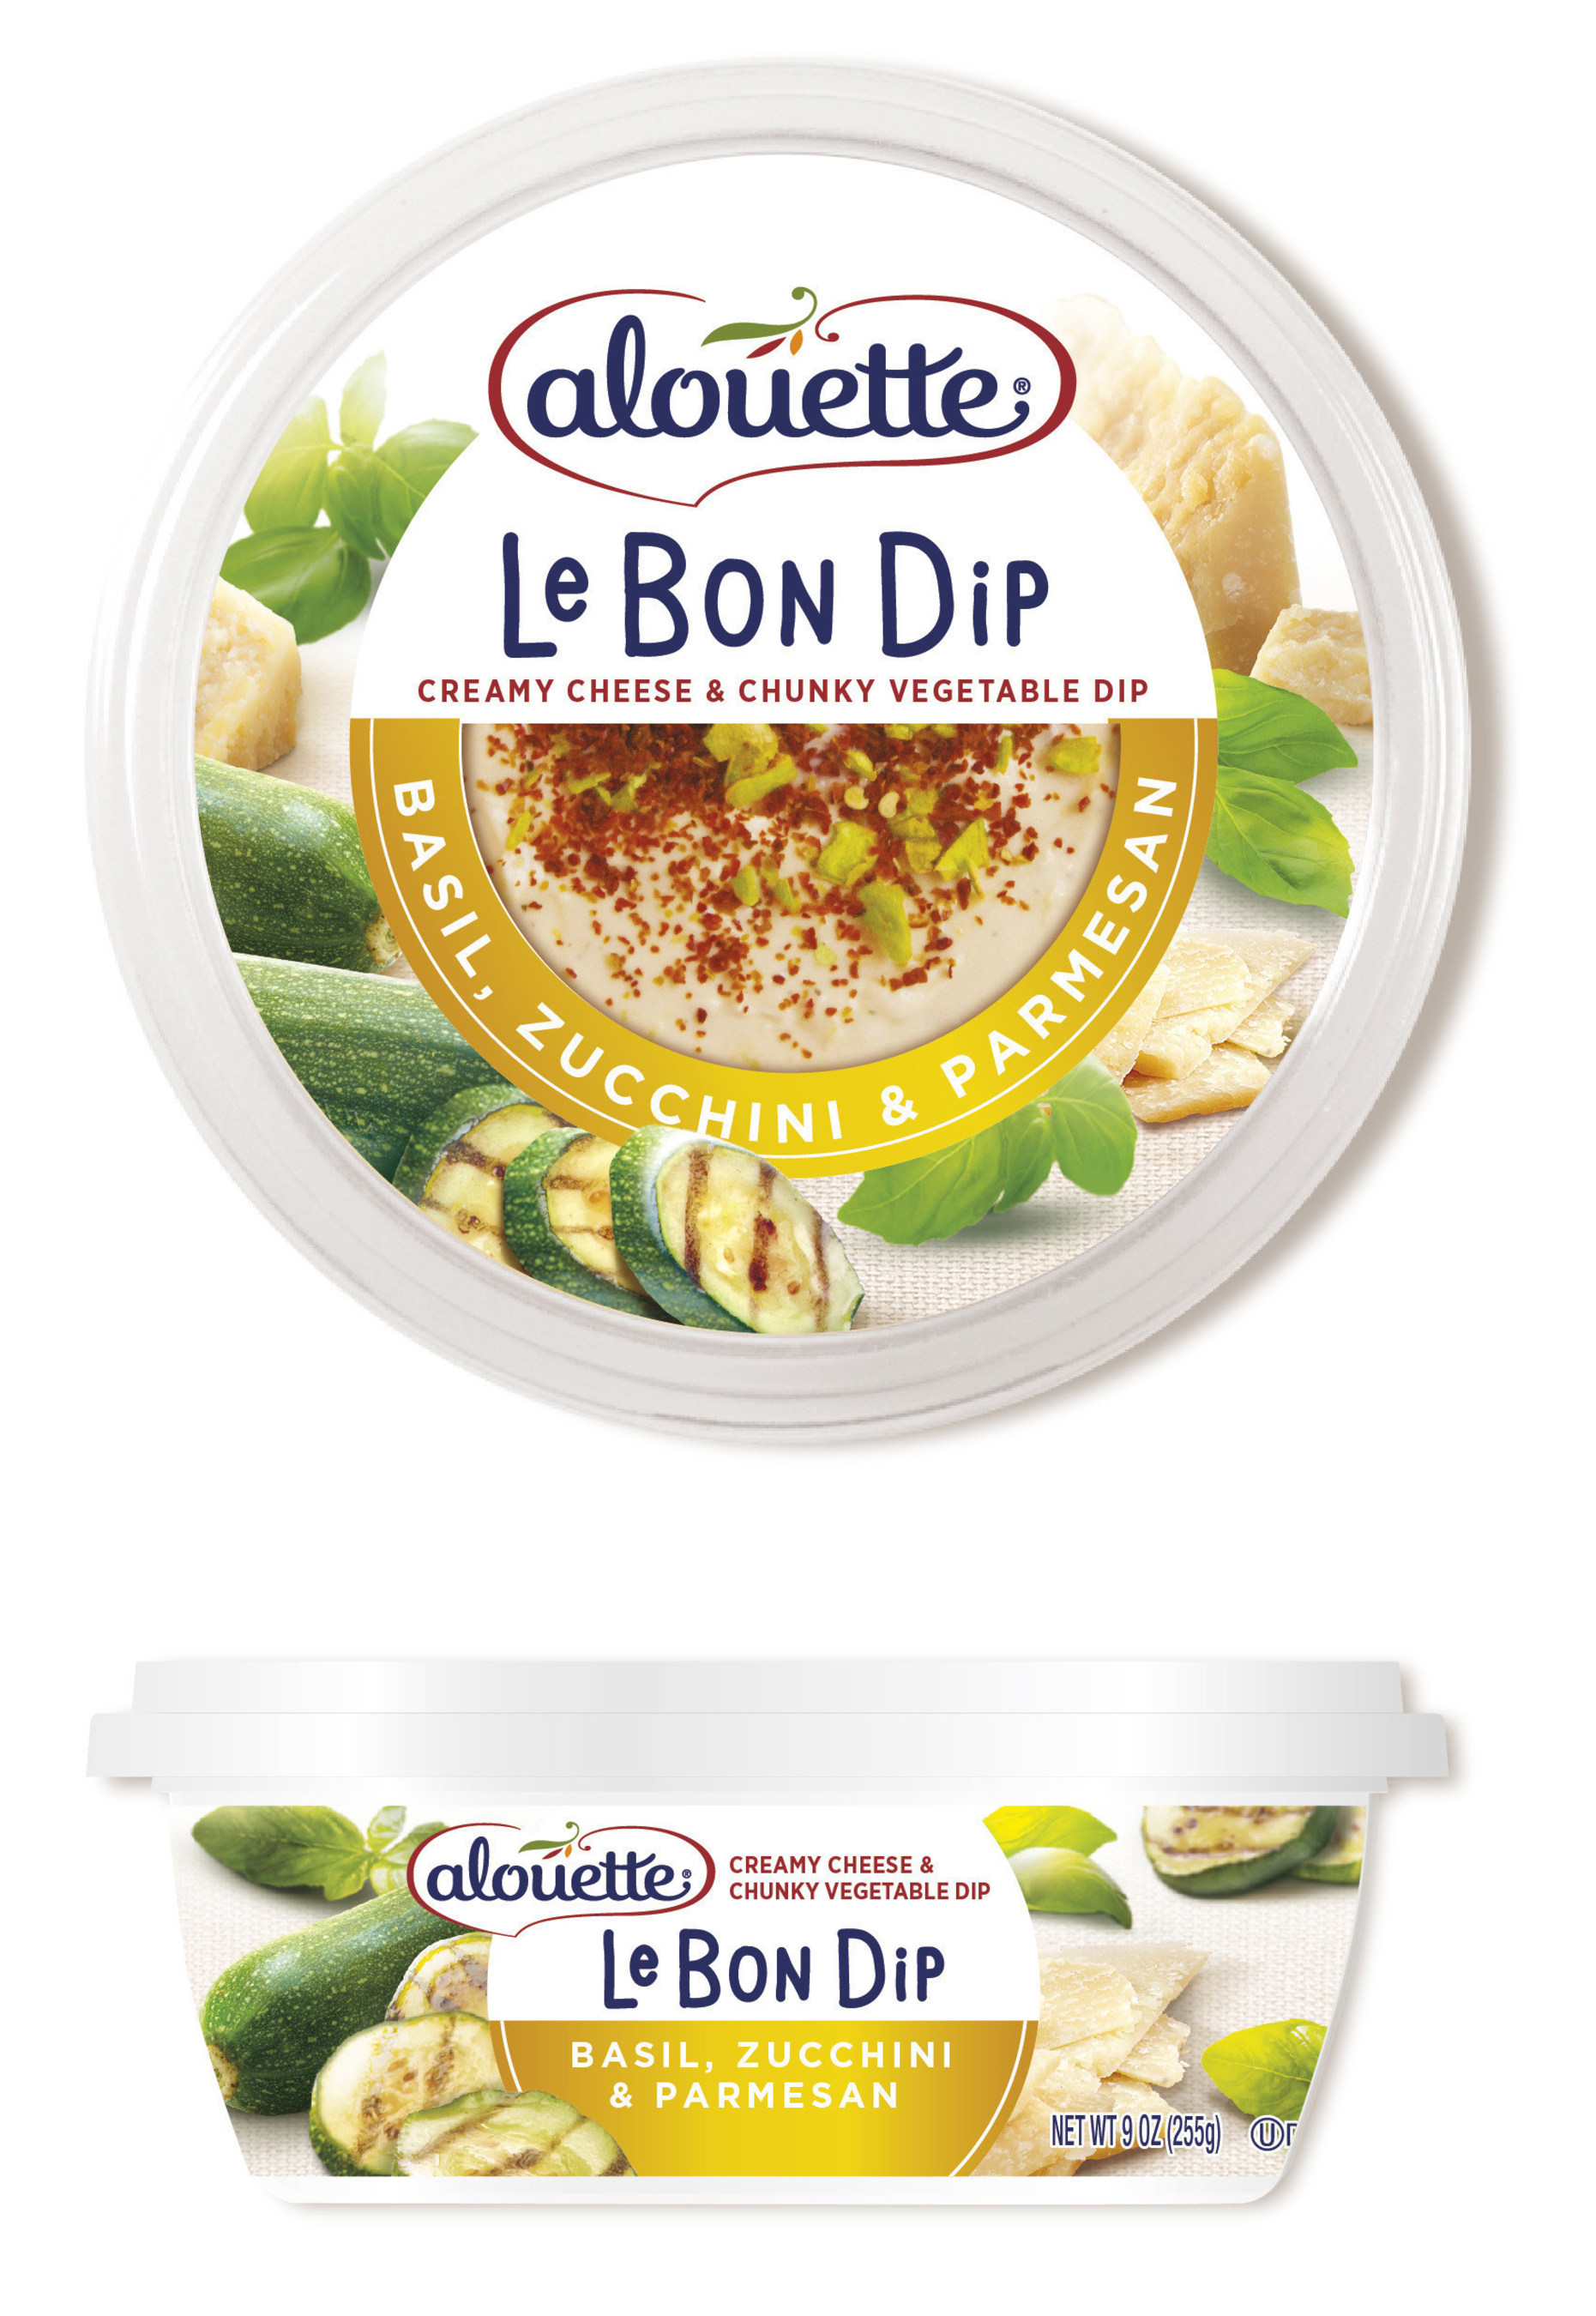 Treat yourself to a better dip with the NEW Le Bon Dip, only from Alouette! An innovative new category in snacking, Le Bon Dip ($4.29 at grocery stores nationwide) features a delicious blend of premium soft cheese, chunky vegetables you can see, and a touch of Greek yogurt for a dip that satisfies with bold, indulgent variety. Le Bon Dip contains no artificial flavors or colors and just 45 calories per serving - that's 30% fewer calories than a standard serving of hummus, but with more...